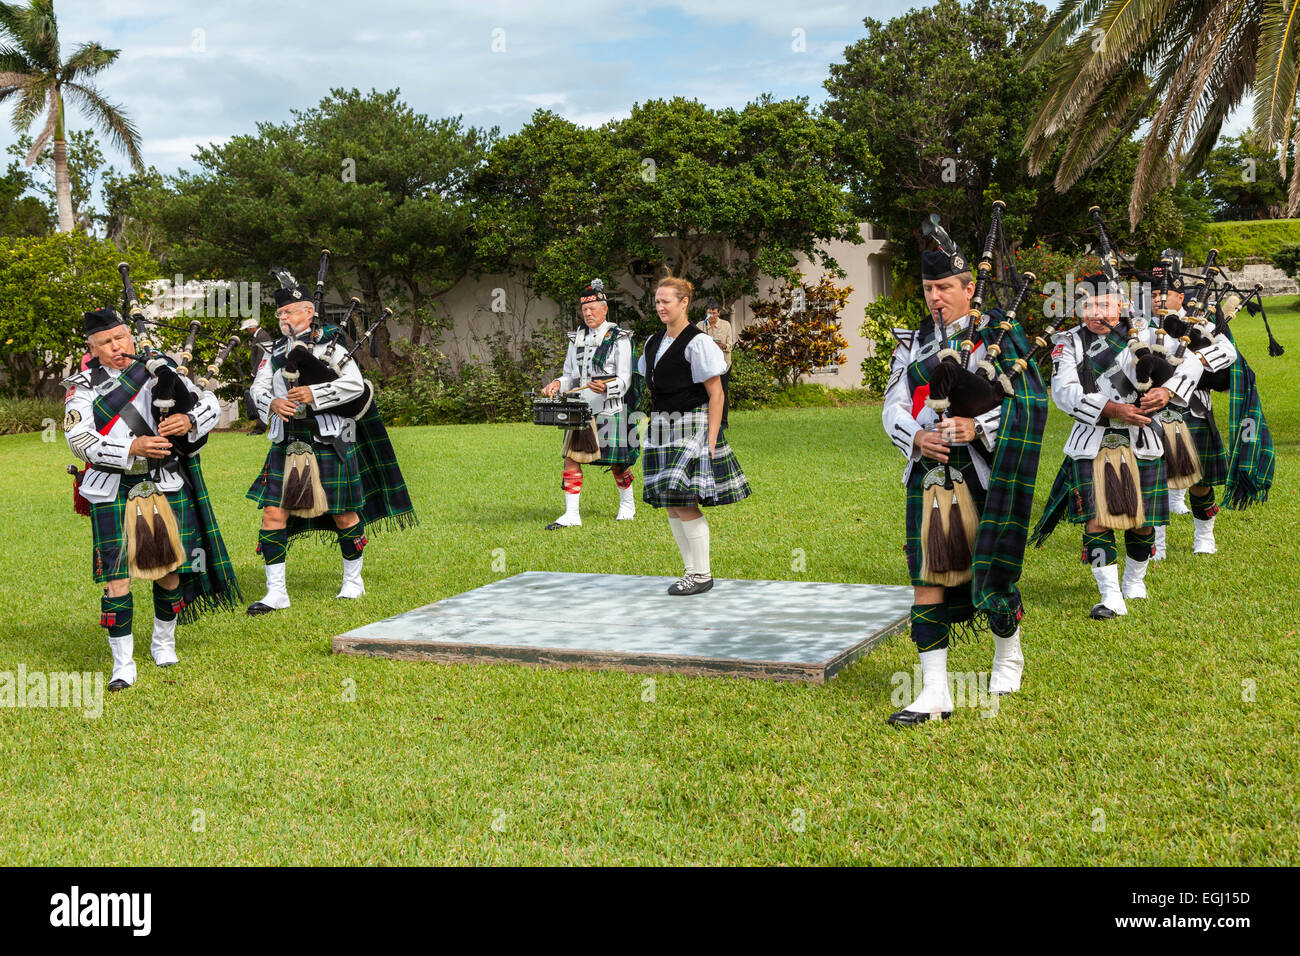 Kilted members of the Bermuda Islands Pipe Band as well as a highland dancer at Fort Hamilton in Hamilton, Bermuda. Stock Photo